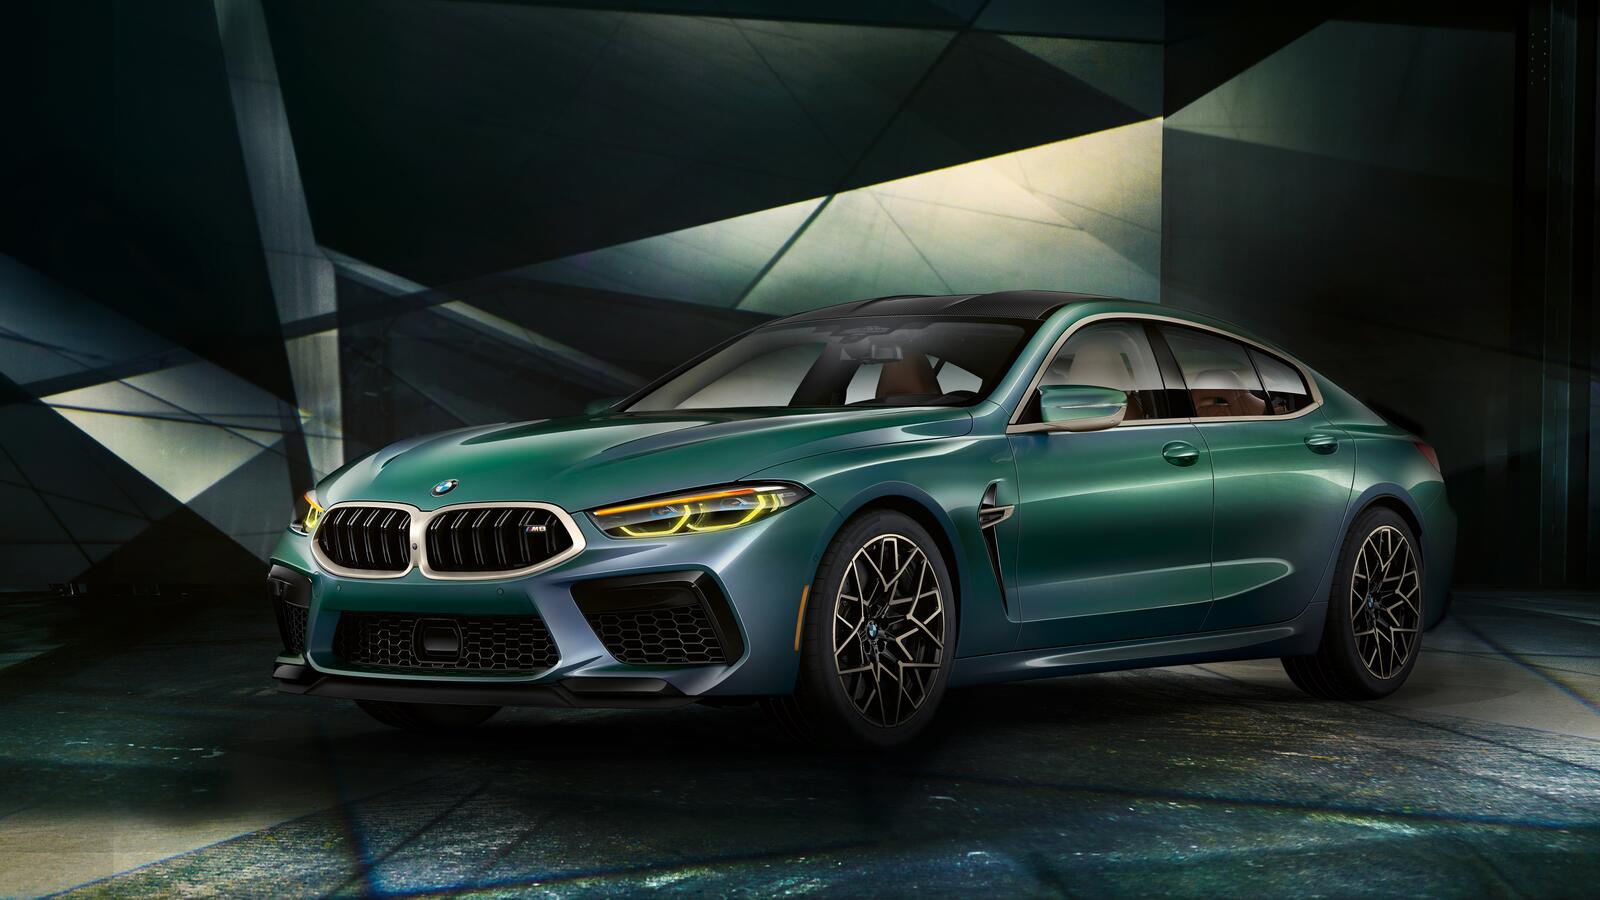 Wallpapers BMW M8 Gran Coupe green luxury cars on the desktop